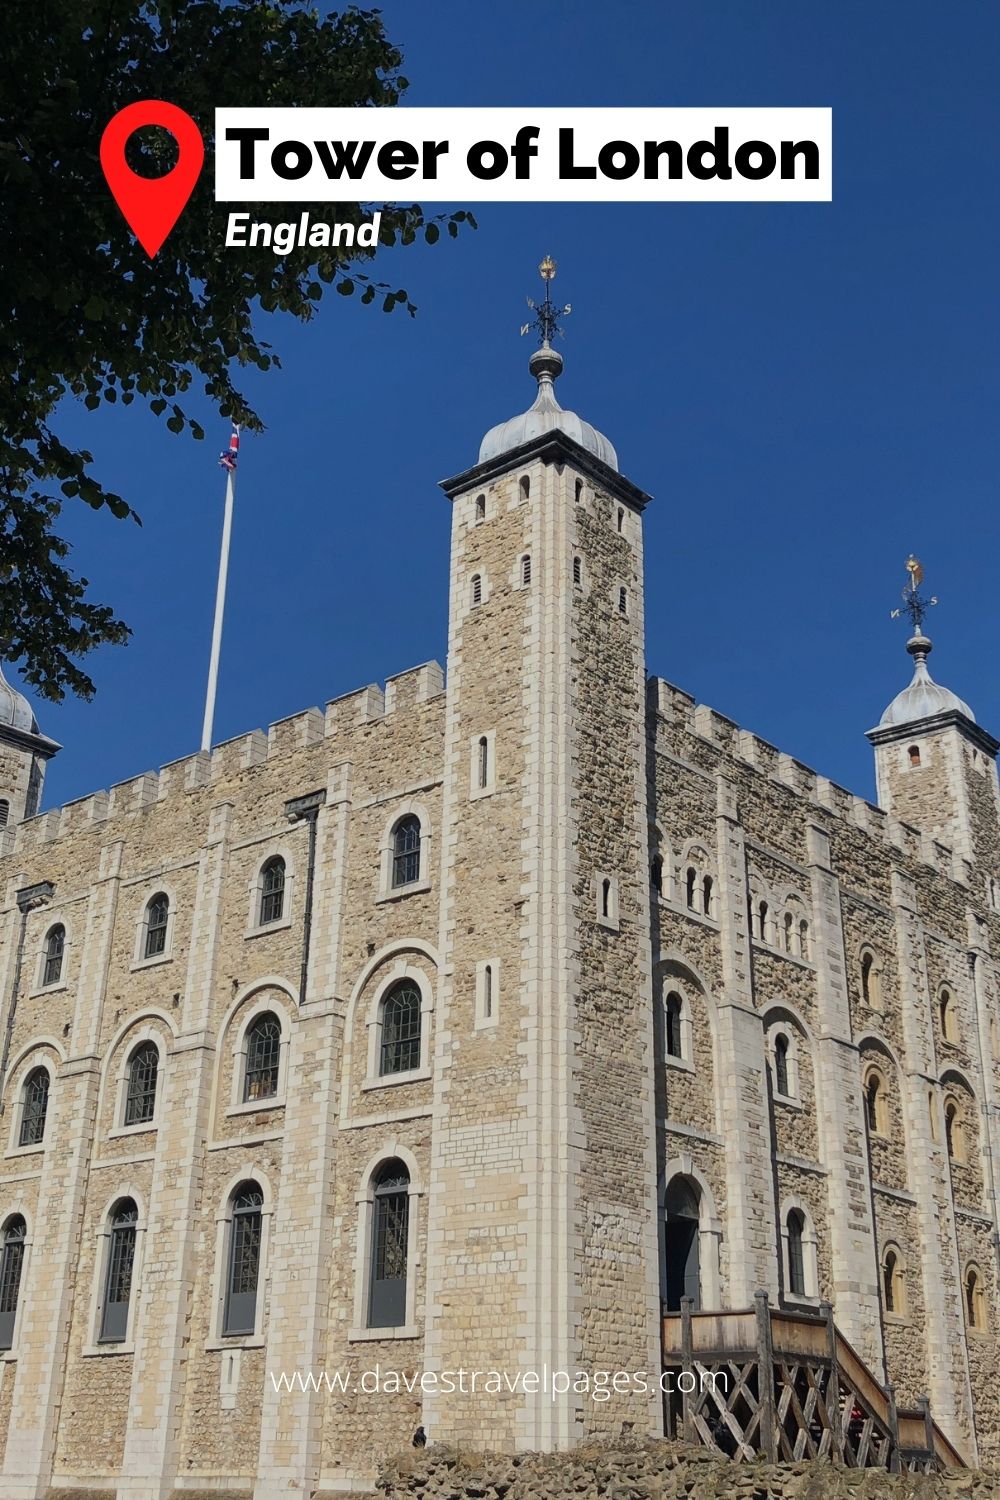 Tower of London: Famous landmarks of Europe